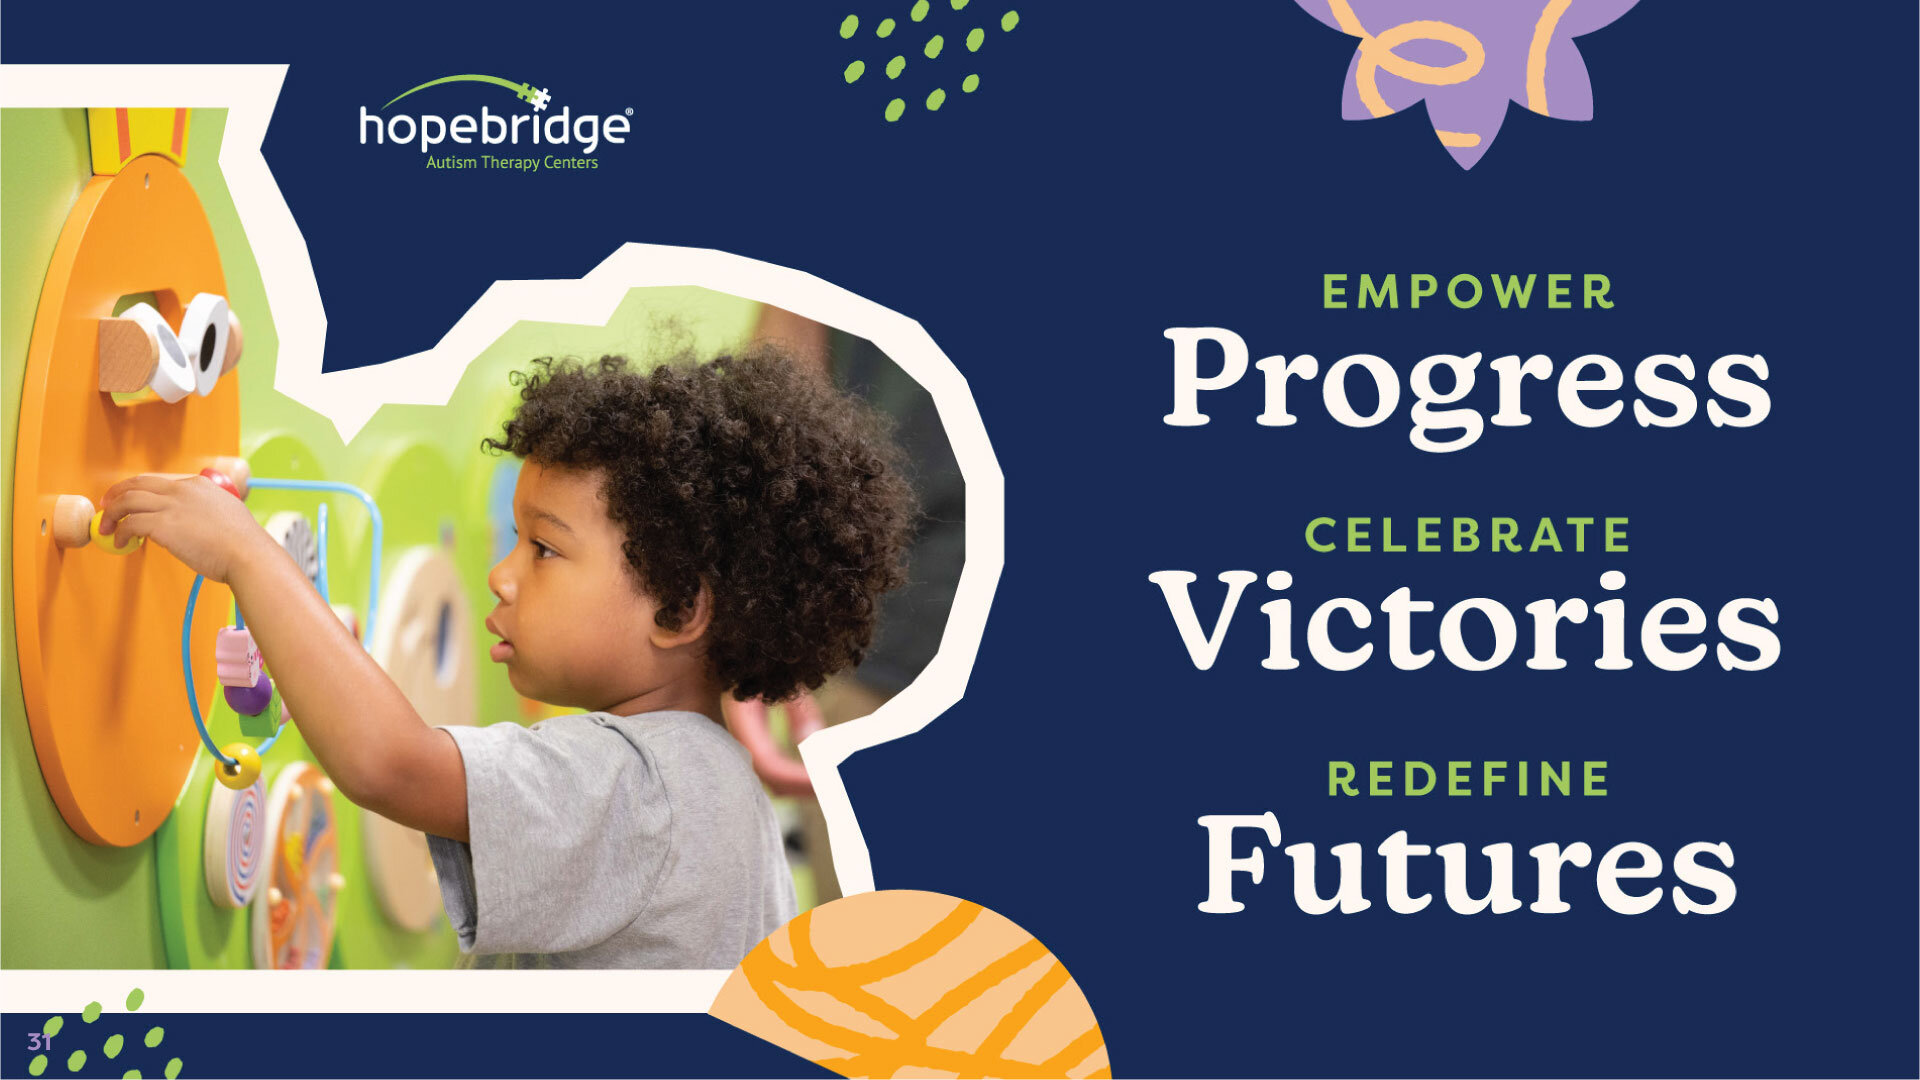 Hopebridge brand standards page 31 with a collage of imagery and some text reading "EMPOWER Progress," "CELEBRATE Victories," and "REDEFINE Futures"